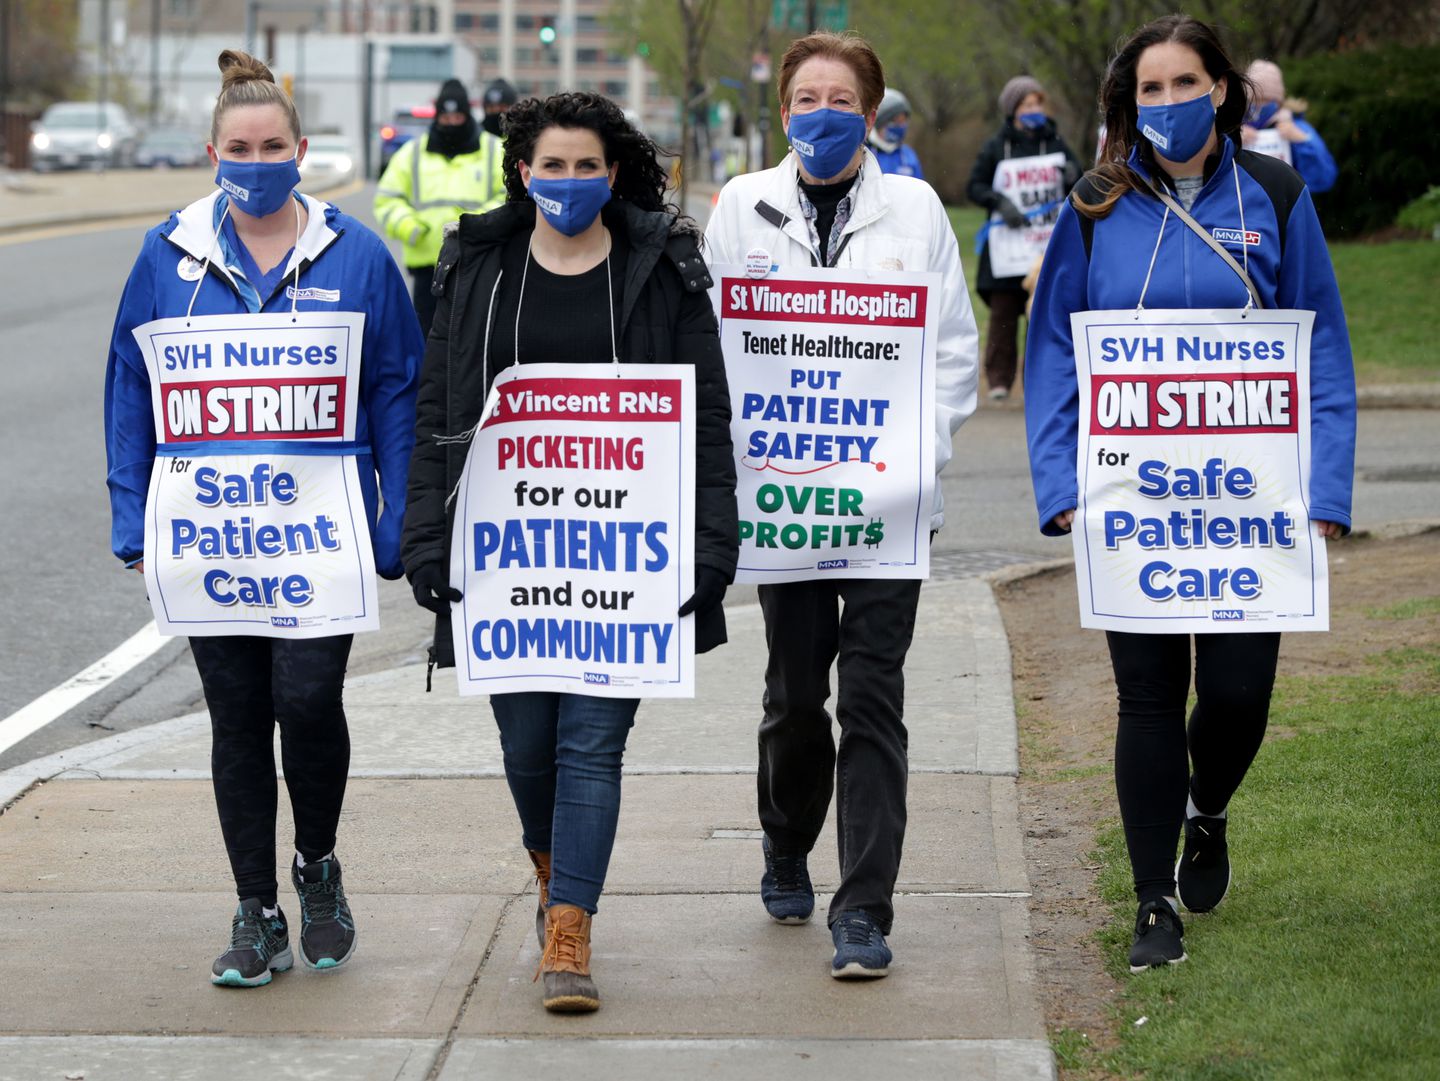 Four female St. Vincent nurses walking side by side on a sidewalk. They are holding signs that read "Safe Patient Care" and "Picketing for our patients and our community."